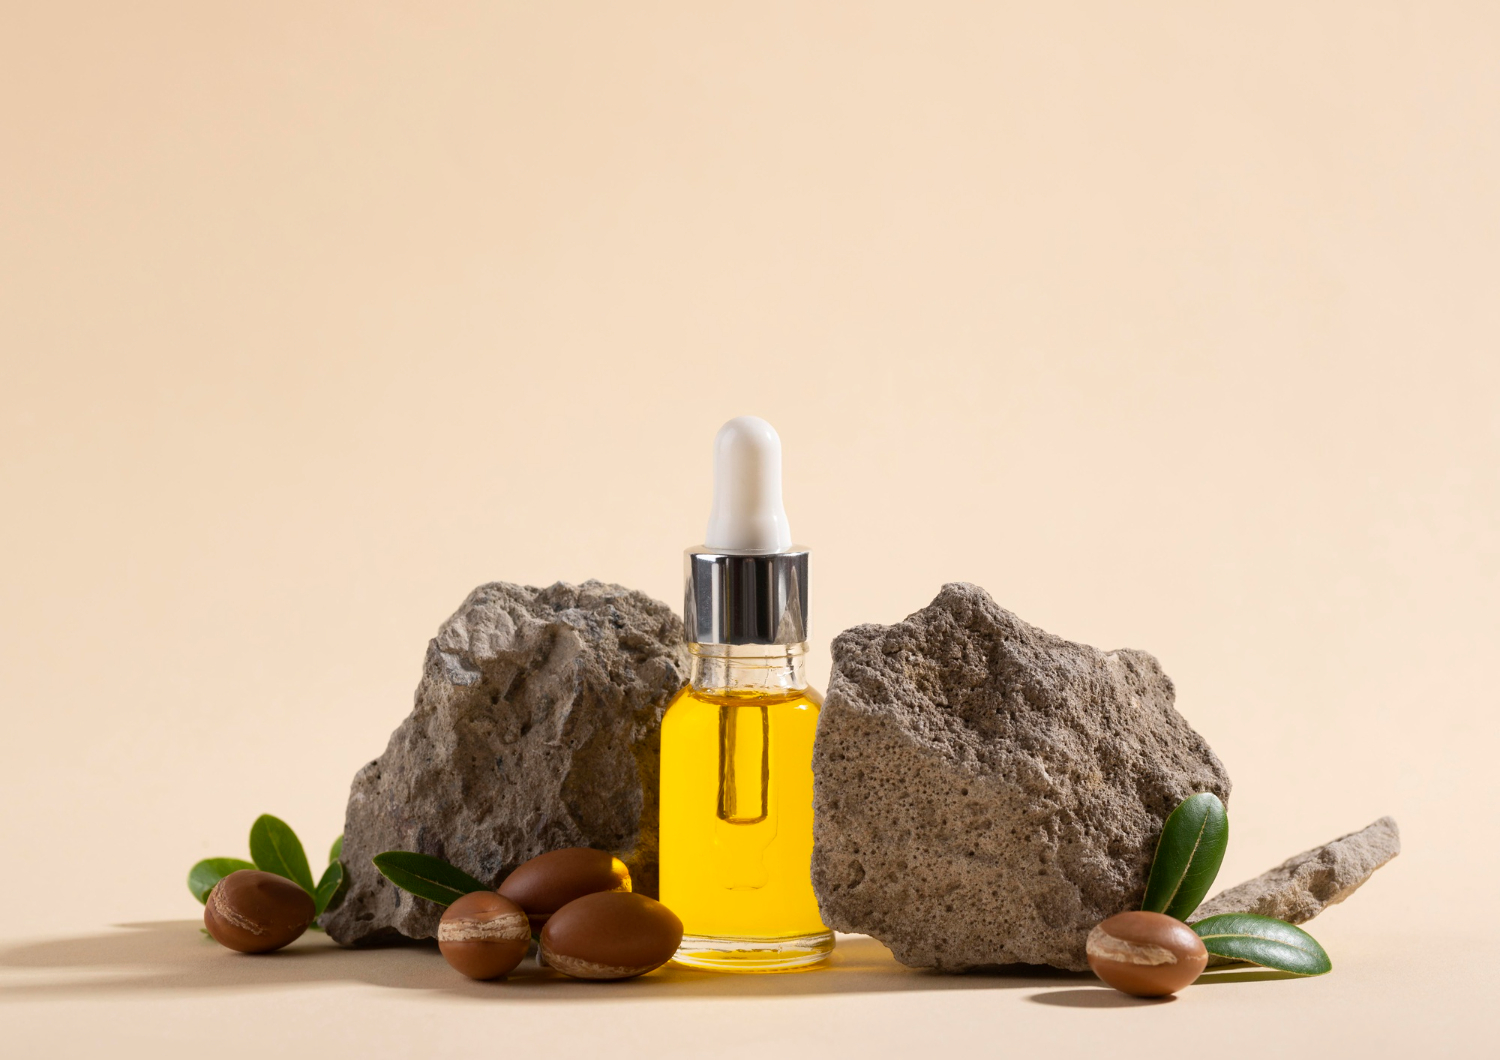 Uses and Advantages of Argan Oil